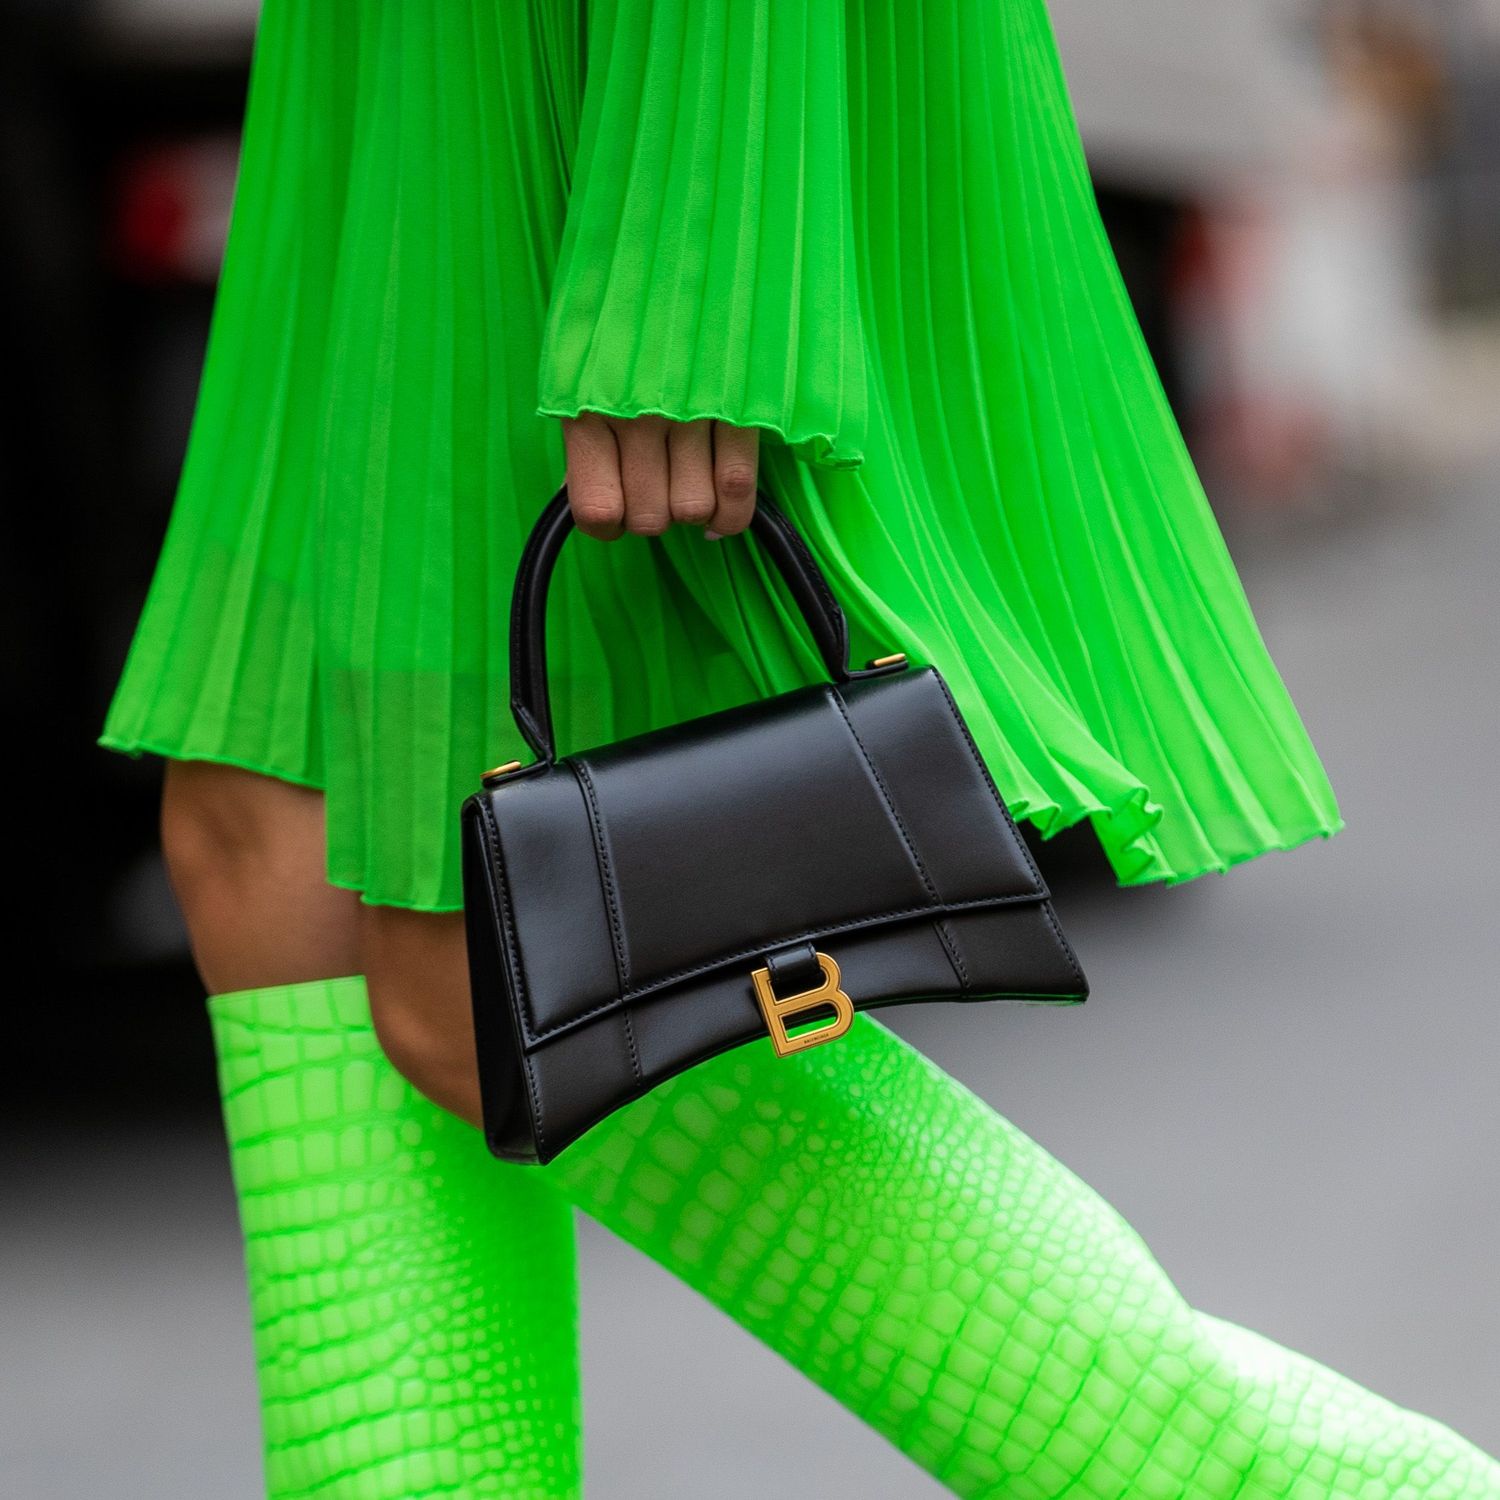 5 colourful new 'it' bags to buy for summer, from Loewe's geometric Puzzle  Hobo bag and Saint Laurent's chic lambskin shoulder bag, to pieces by  Balenciaga, Bottega Veneta and Valentino